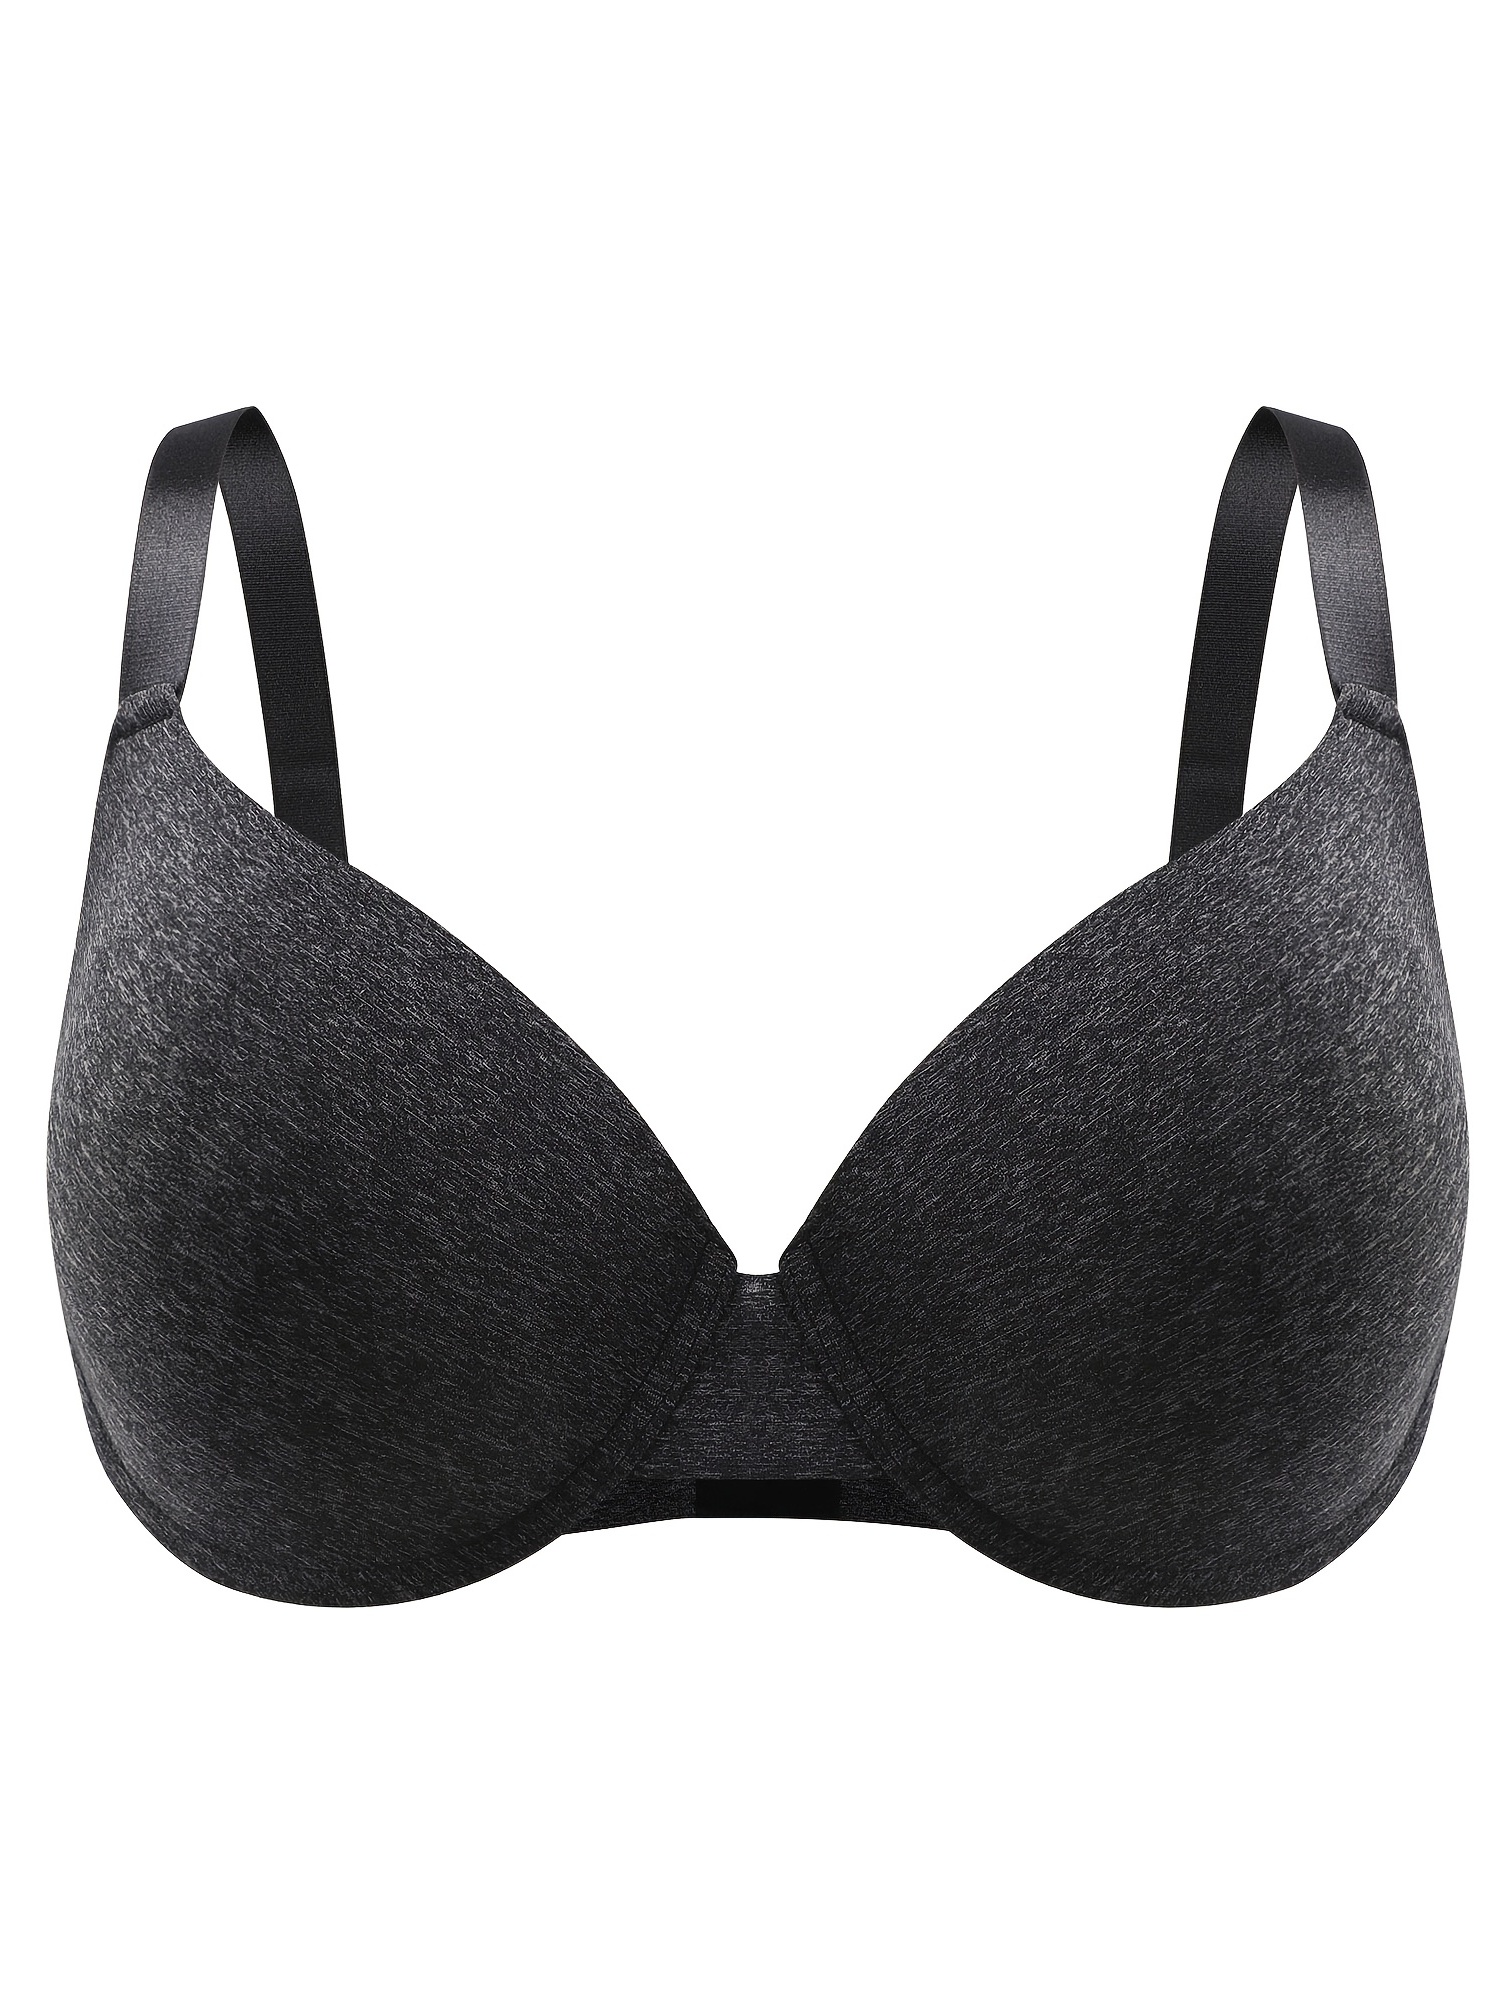 Front Closure Sports Bras for Women,Daisy Bra for Seniors,Convenient Front  Snap Wireless Unlined Full Coverage Everyday Bras